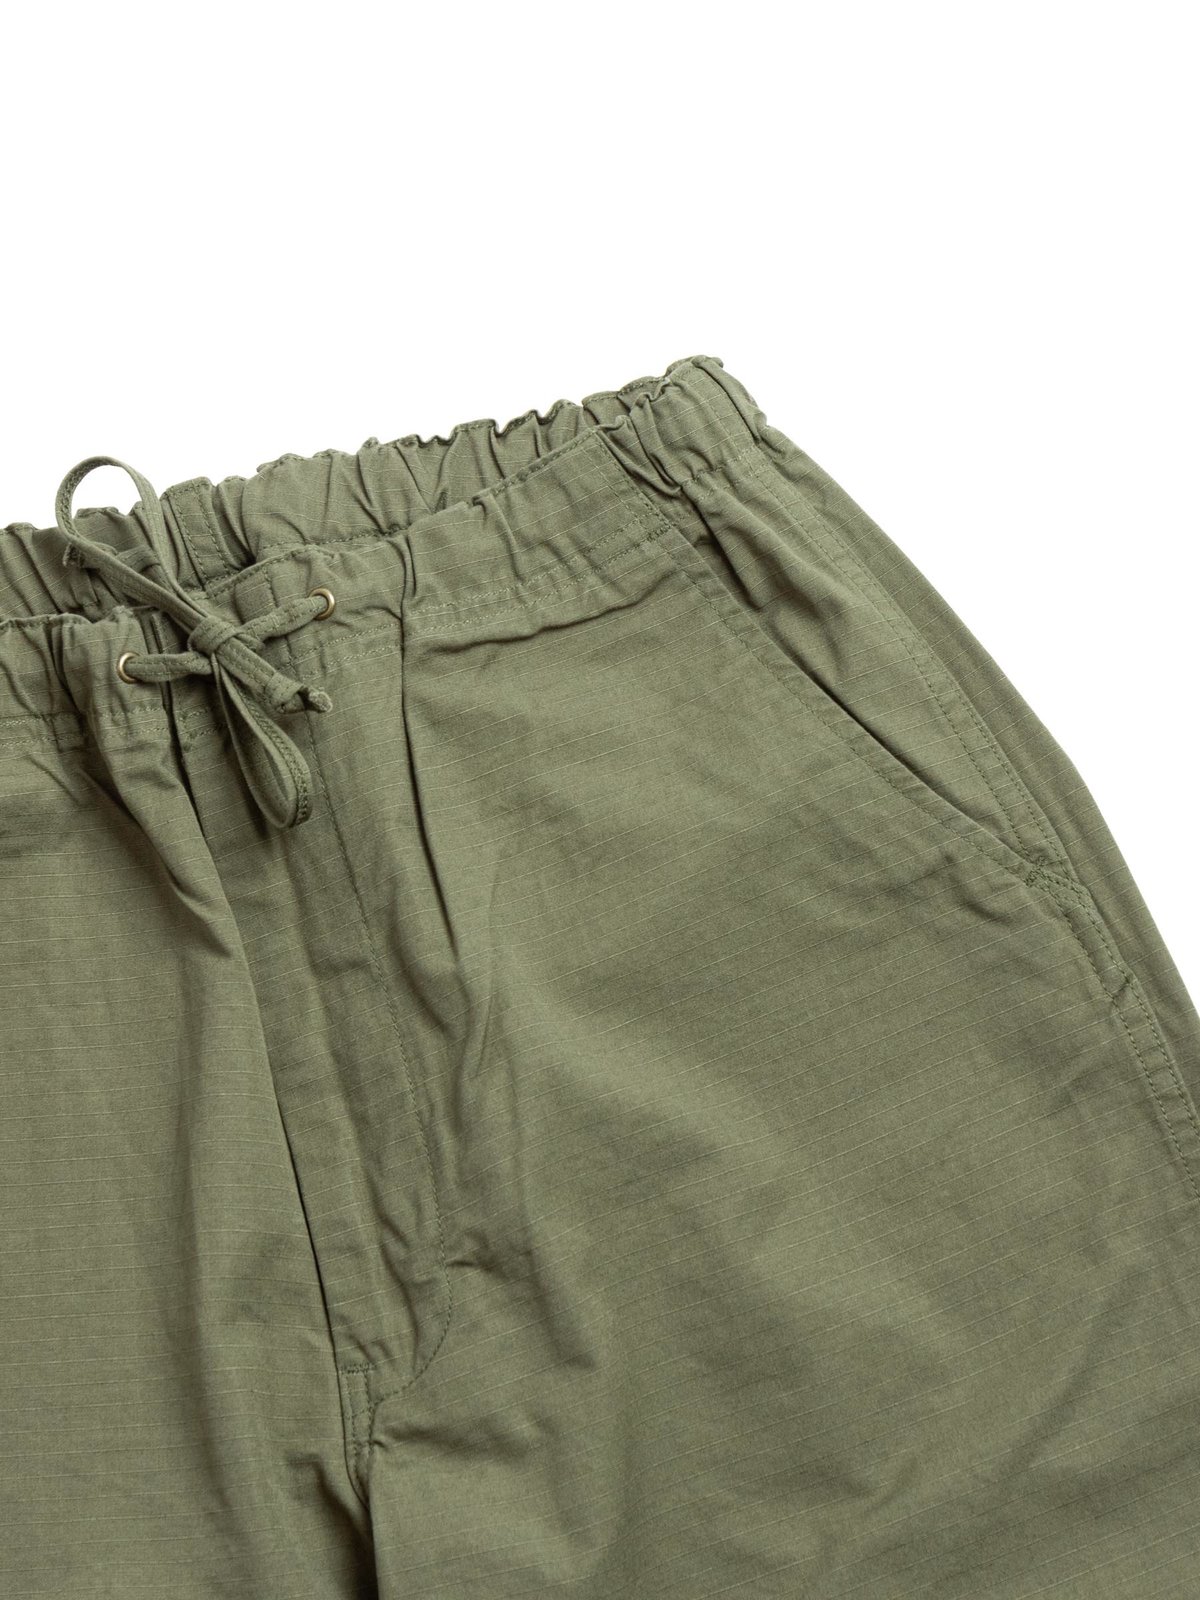 NEW YORKER PANT ARMY RIPSTOP - Image 2